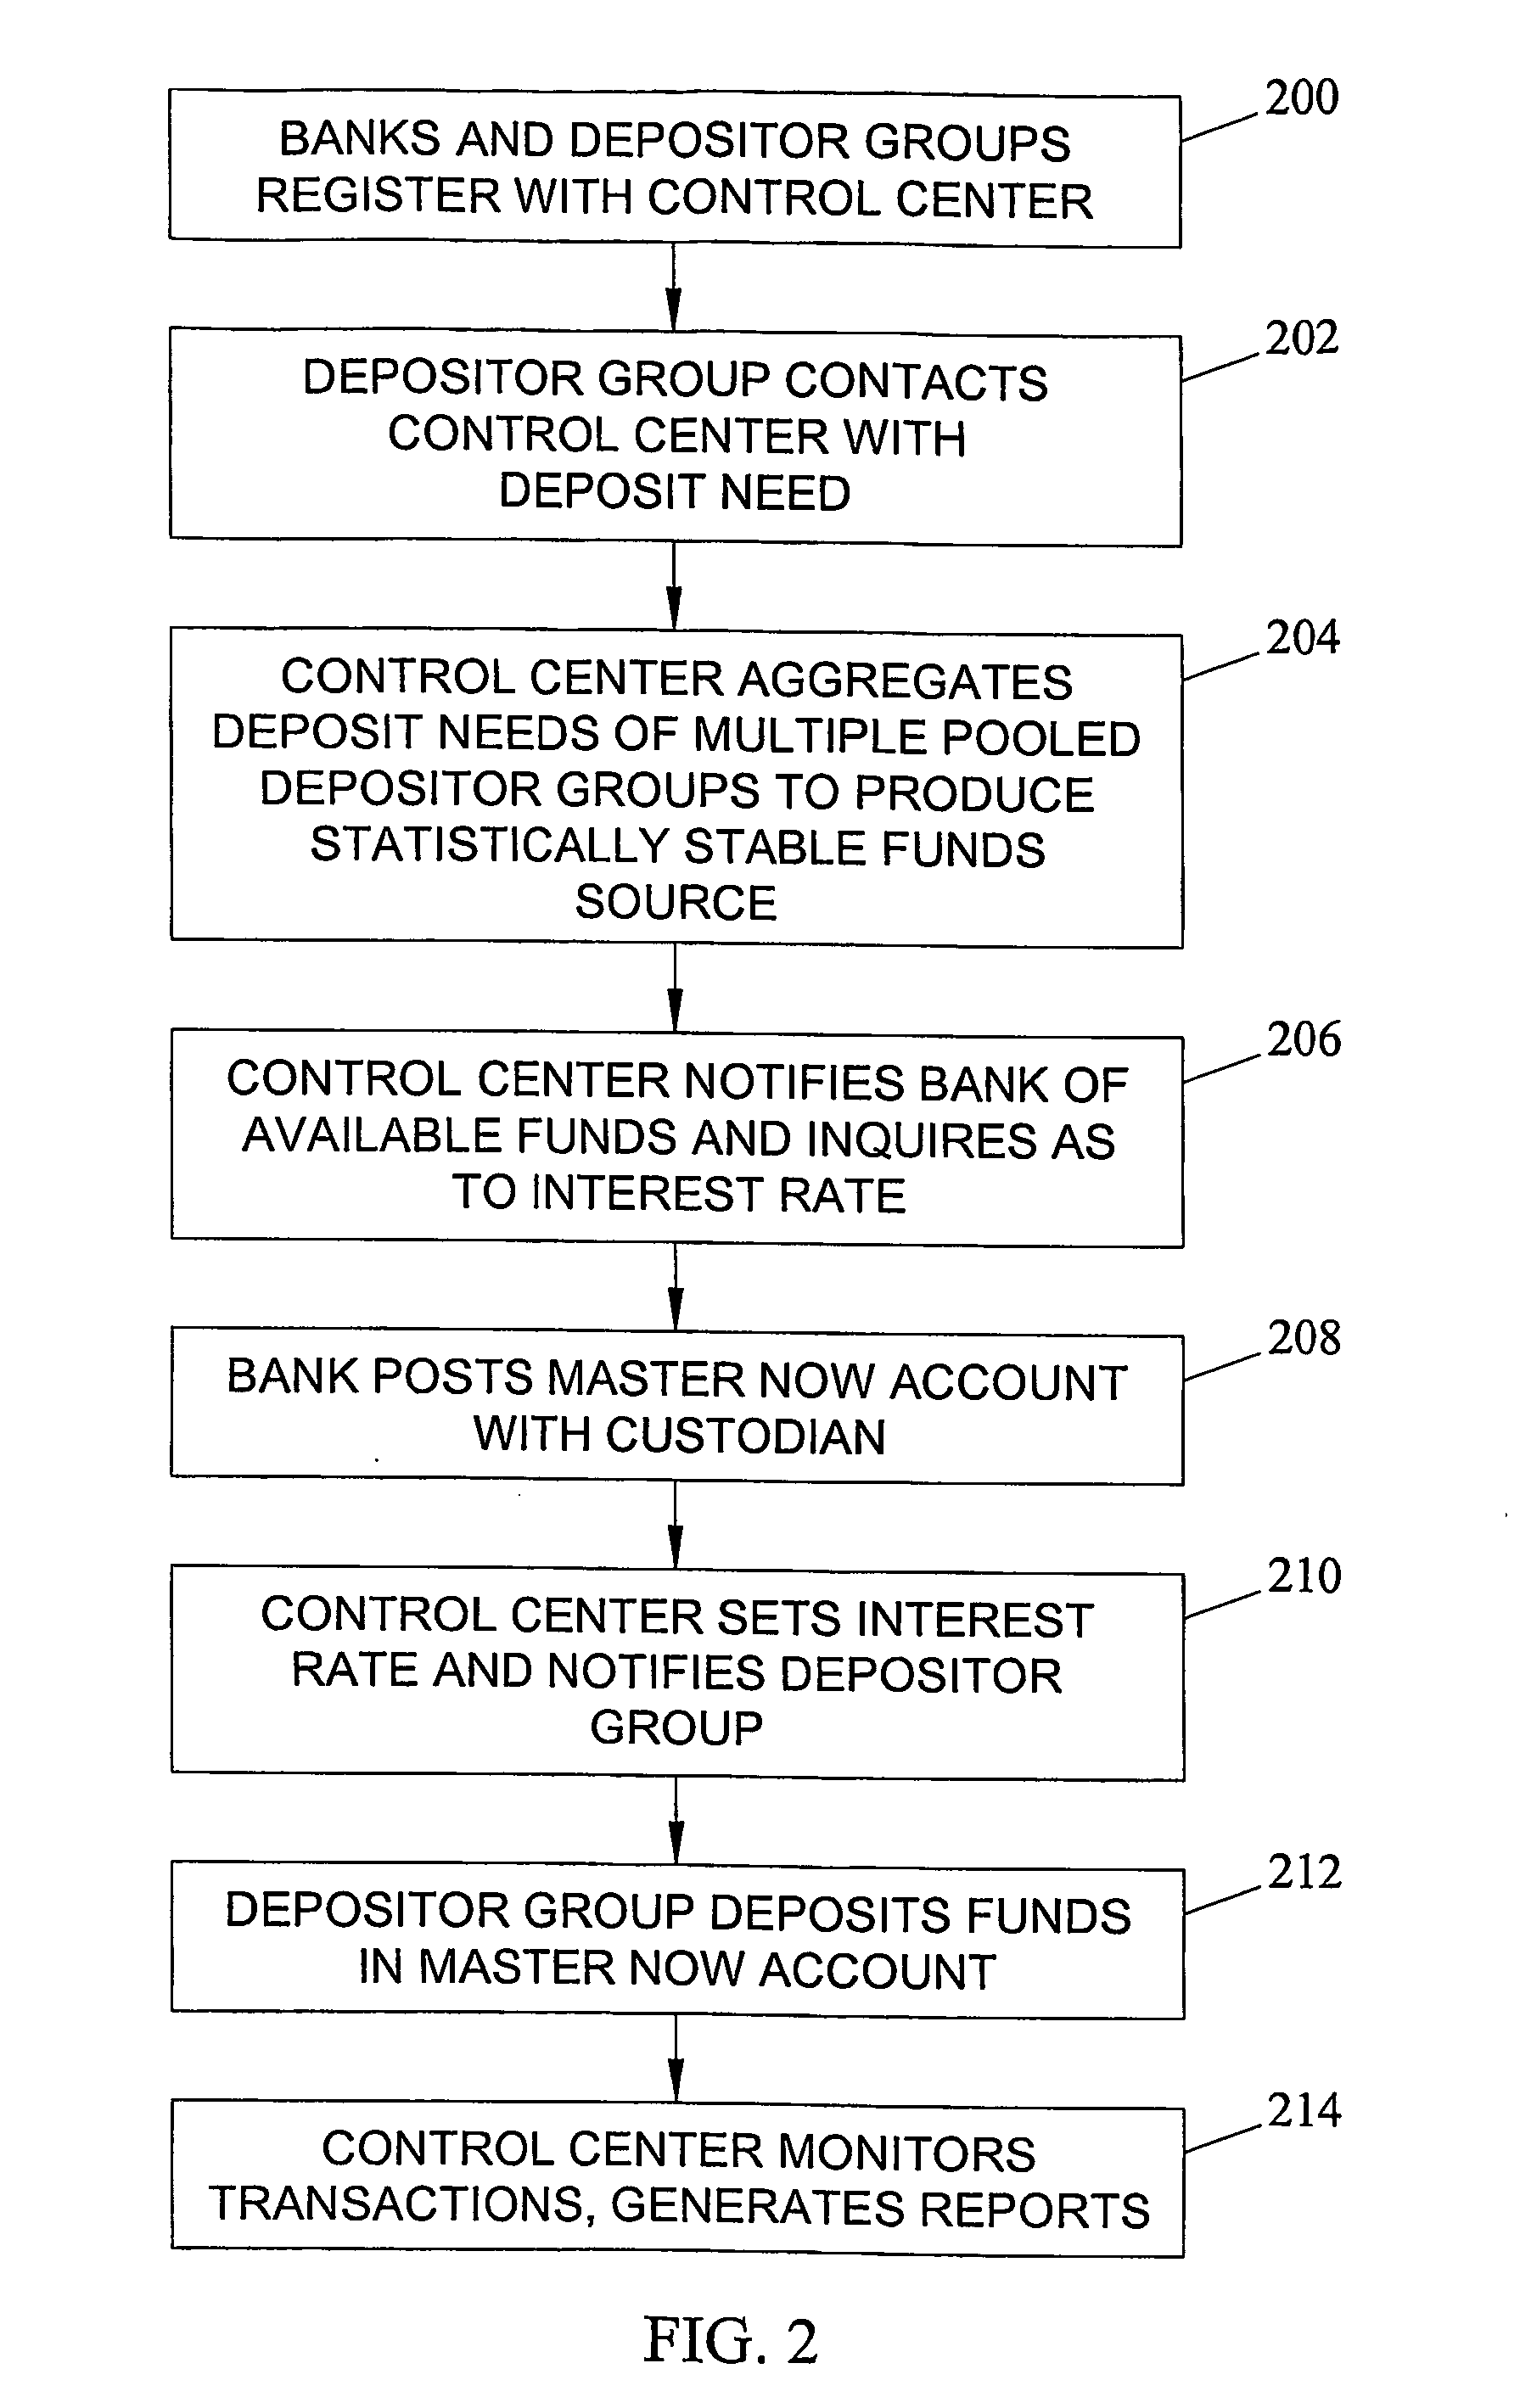 Methods and Systems for Facilitating Transactions Between Commercial Banks and Pooled Depositor Groups